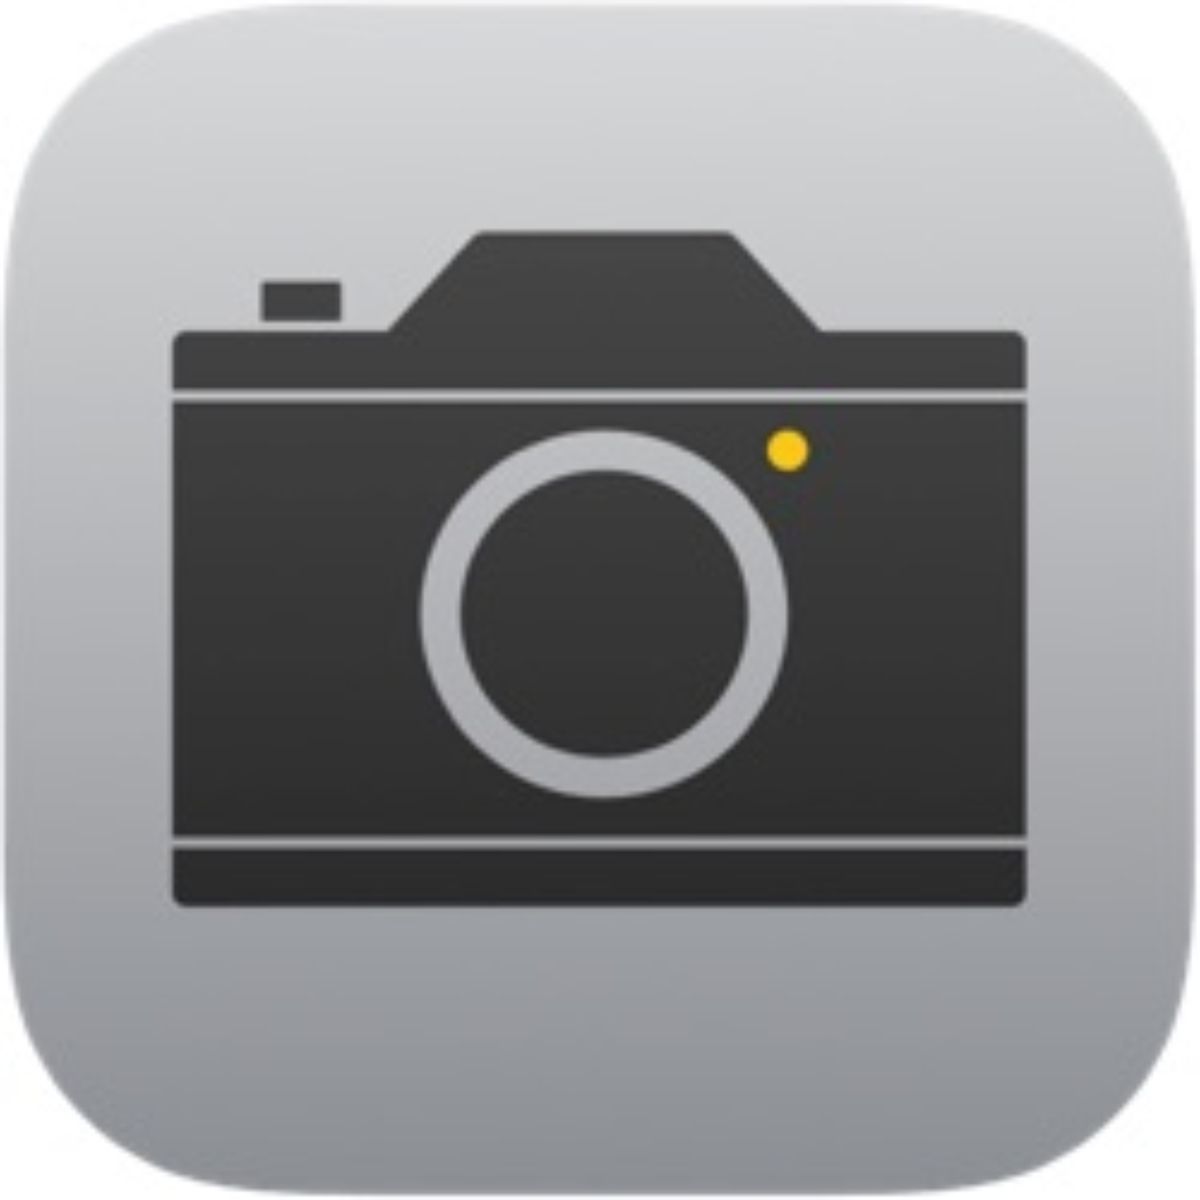 How to Set Your iPhone's Camera Back to Saving Photo as JPEG in iOS 11